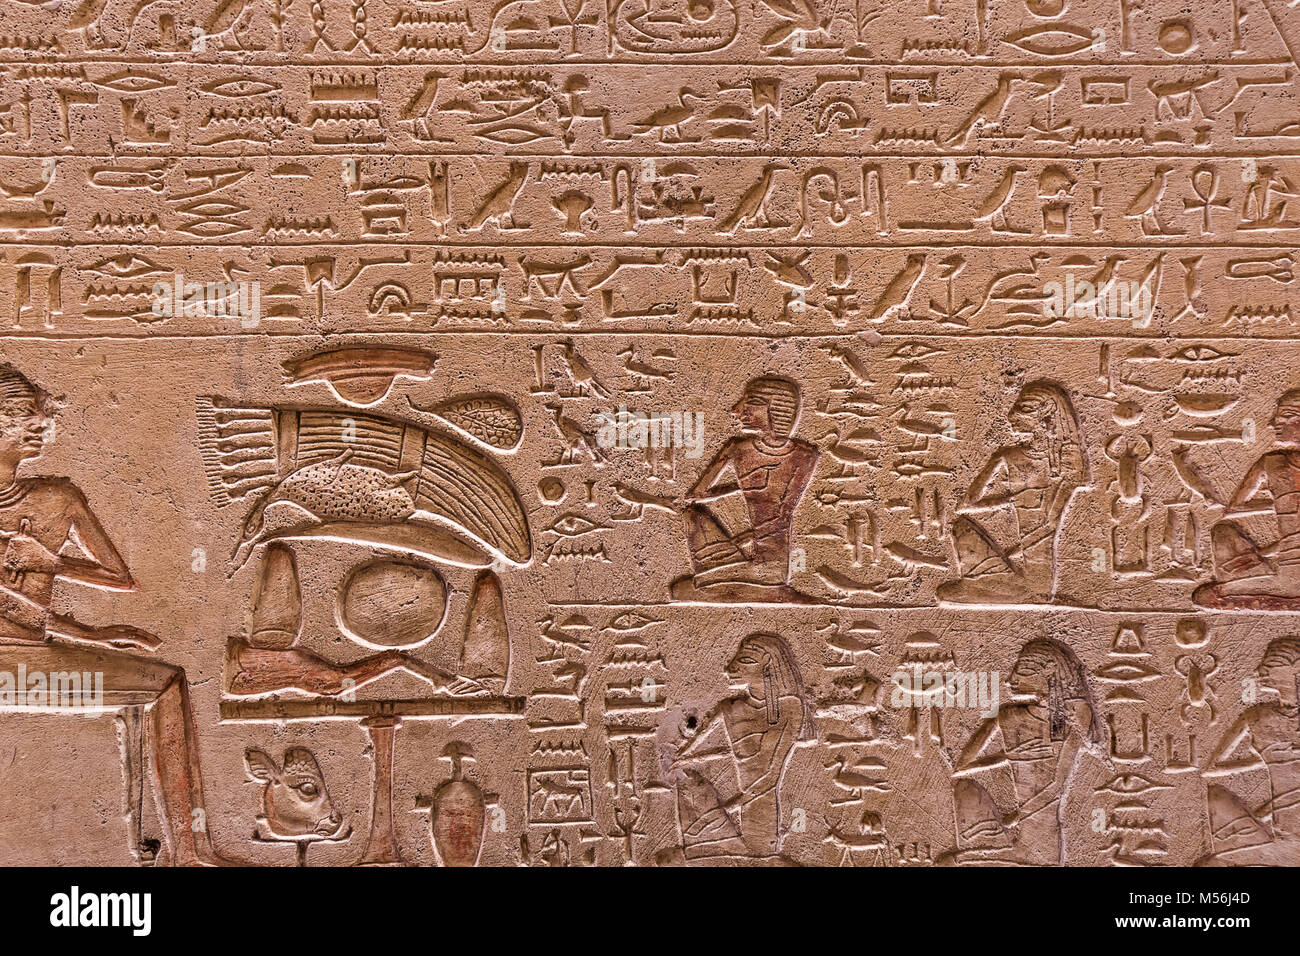 Old egypt scriptures background Stock Photo